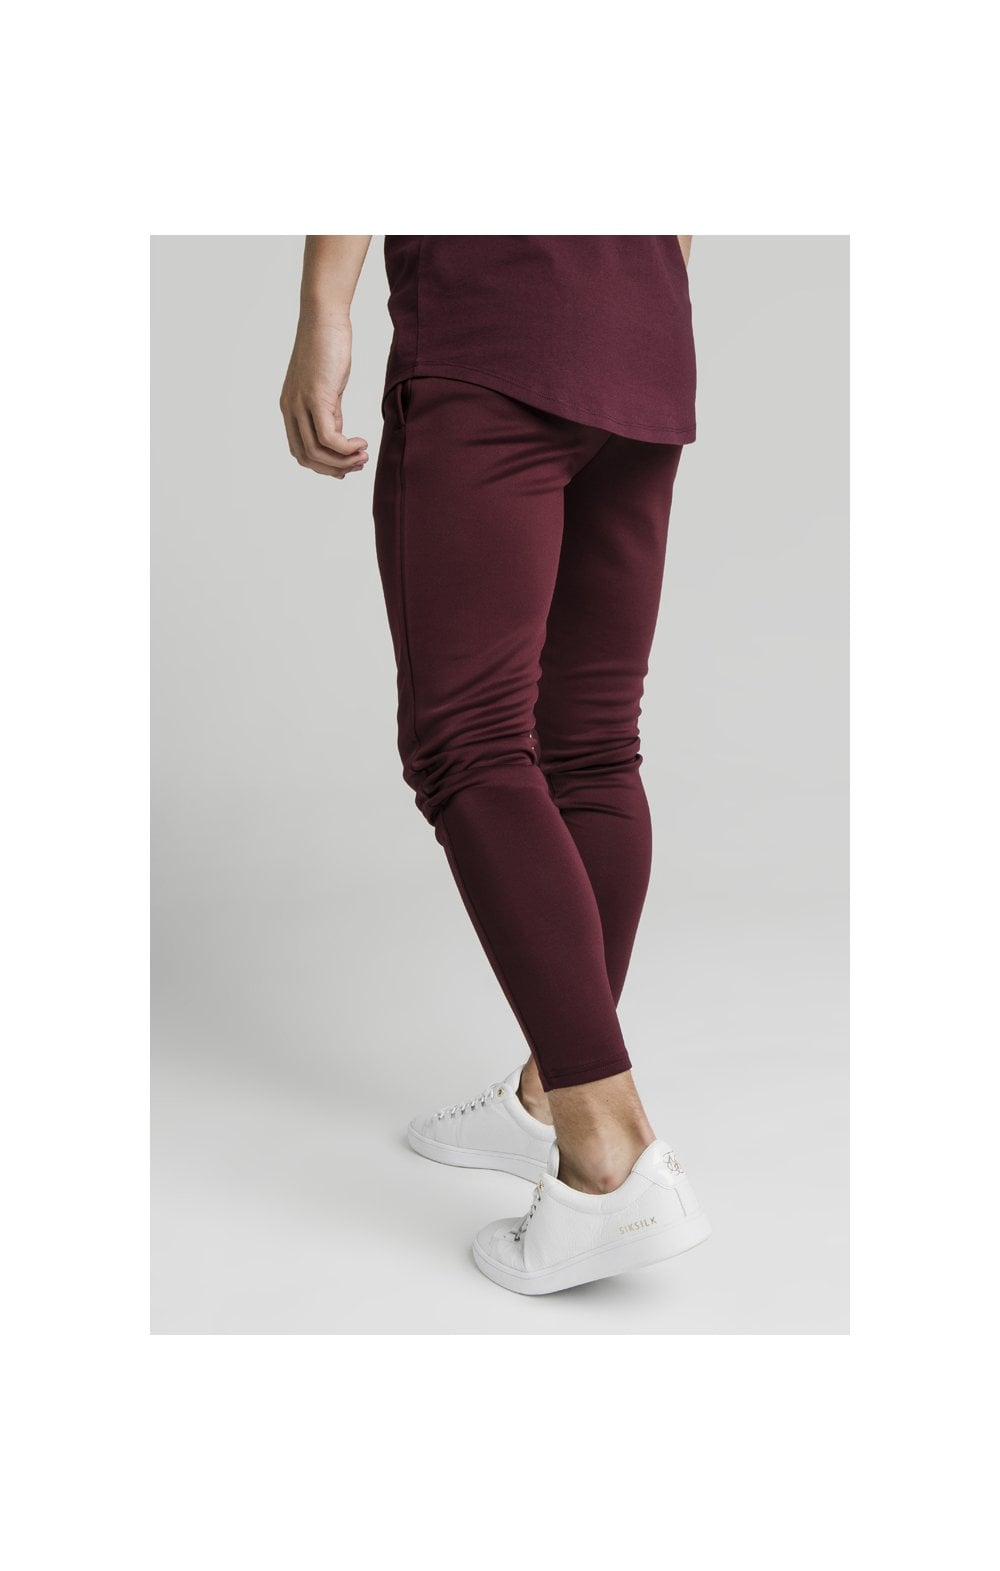 Load image into Gallery viewer, Illusive London Agility Track Pants - Burgundy (3)